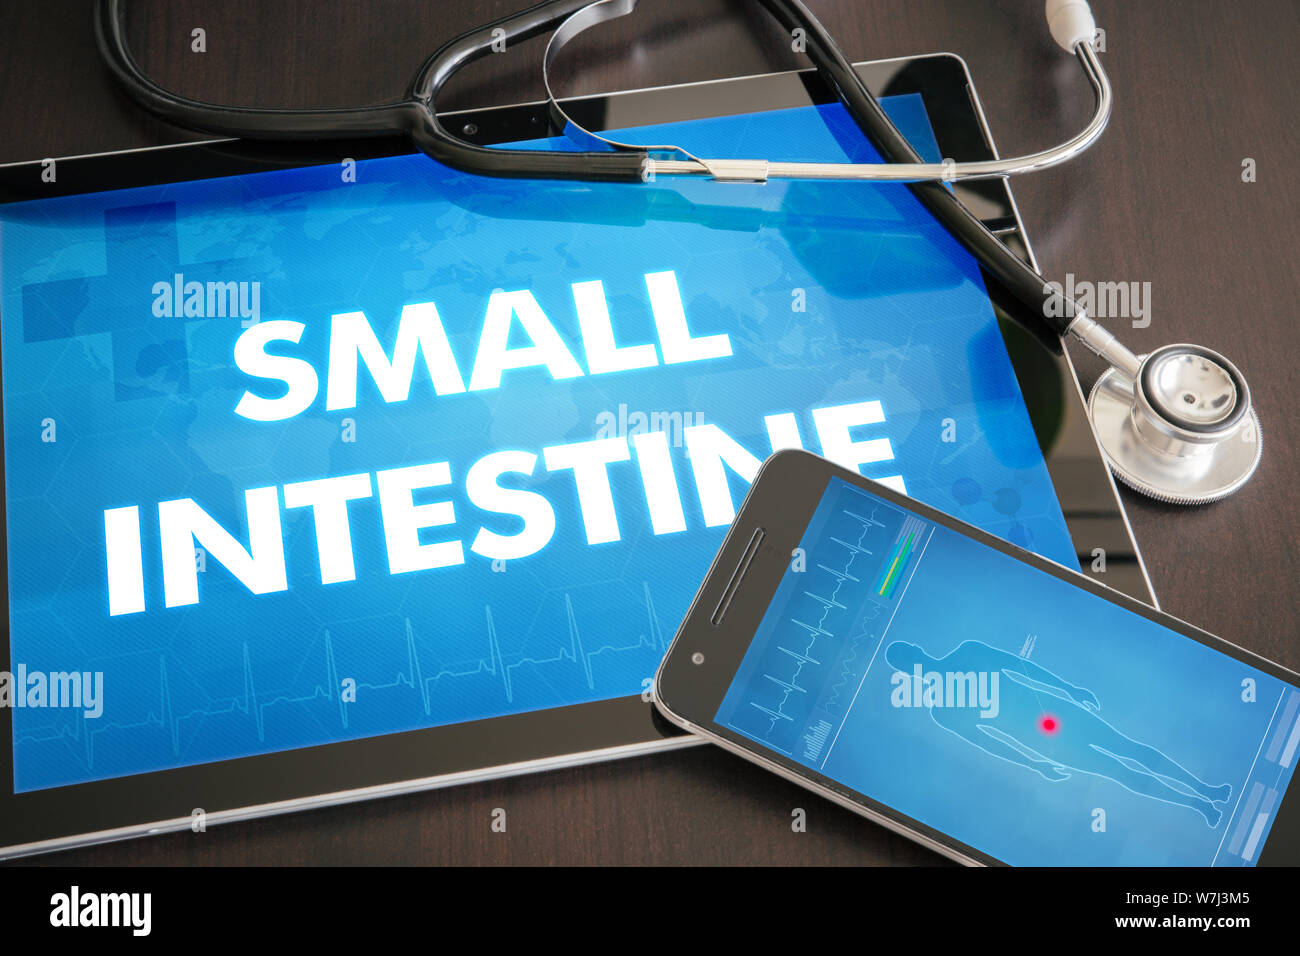 Small intestine (gastrointestinal disease related body part) diagnosis medical concept on tablet screen with stethoscope. Stock Photo